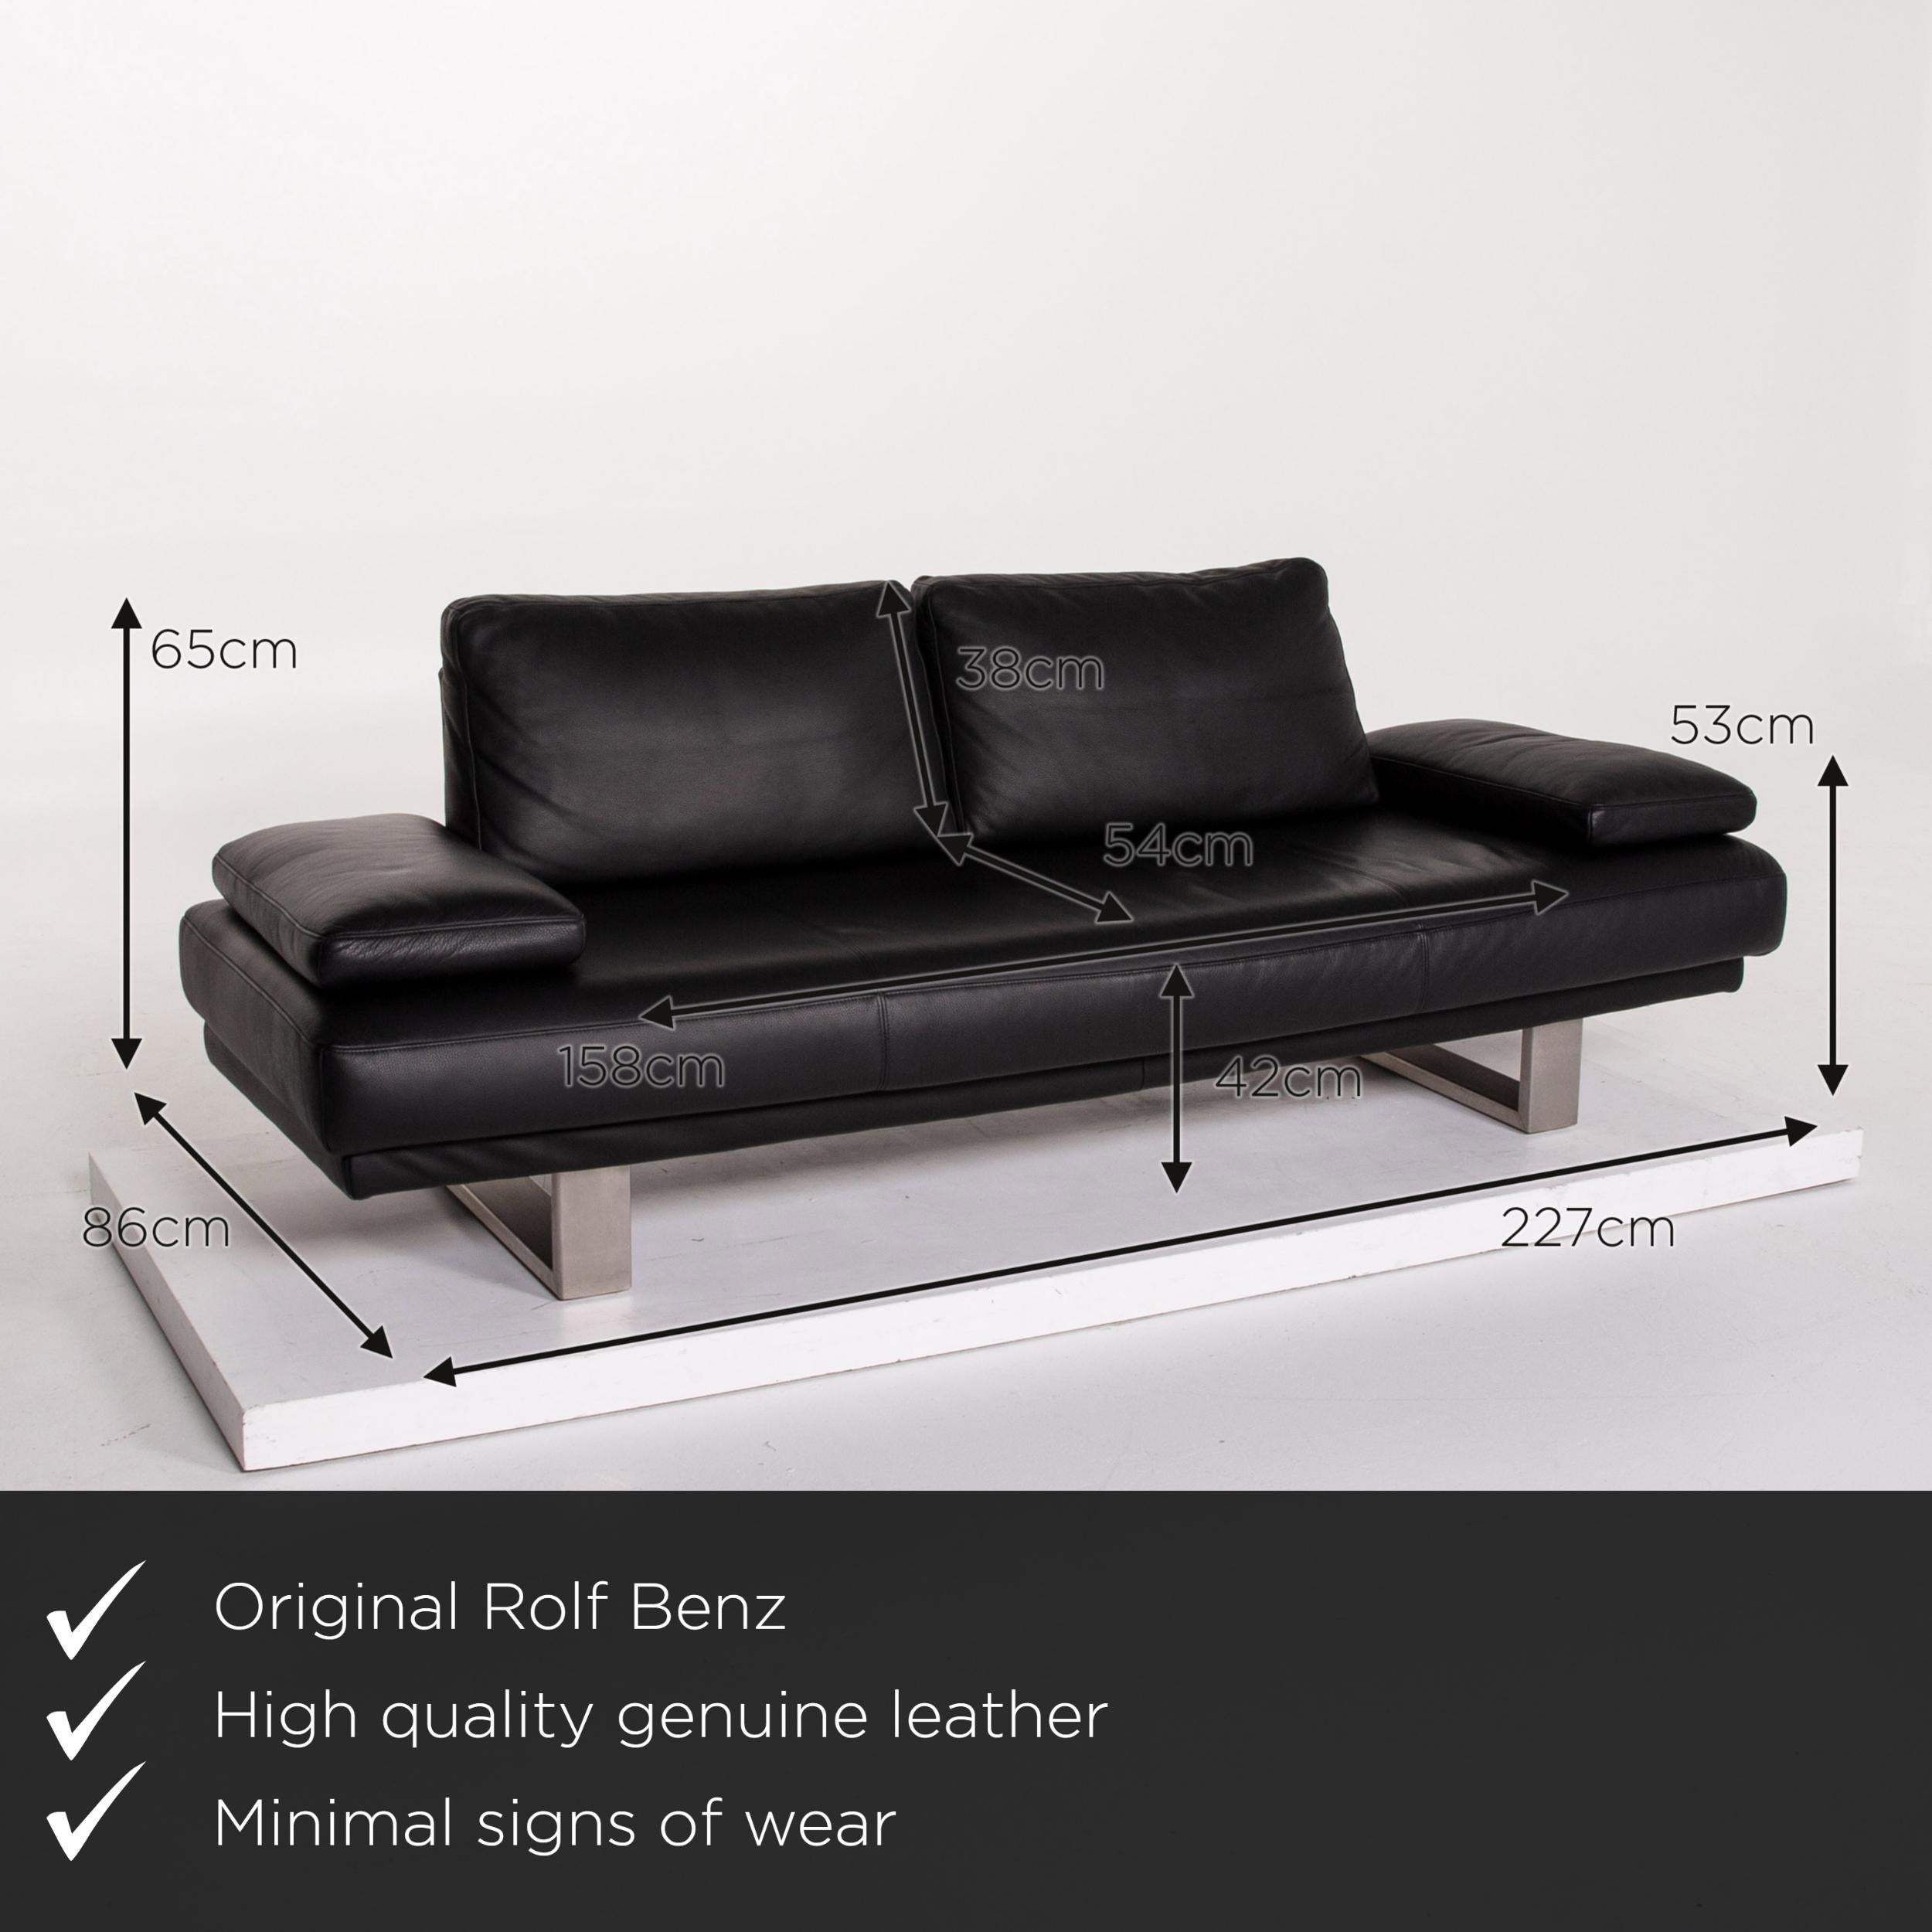 We present to you a Rolf Benz 6600 leather sofa three-seat couch.



 Product measurements in centimeters:
 

Depth 86
Width 227
Height 65
Seat height 42
Rest height 53
Seat depth 54
Seat width 158
Back height 38.
  